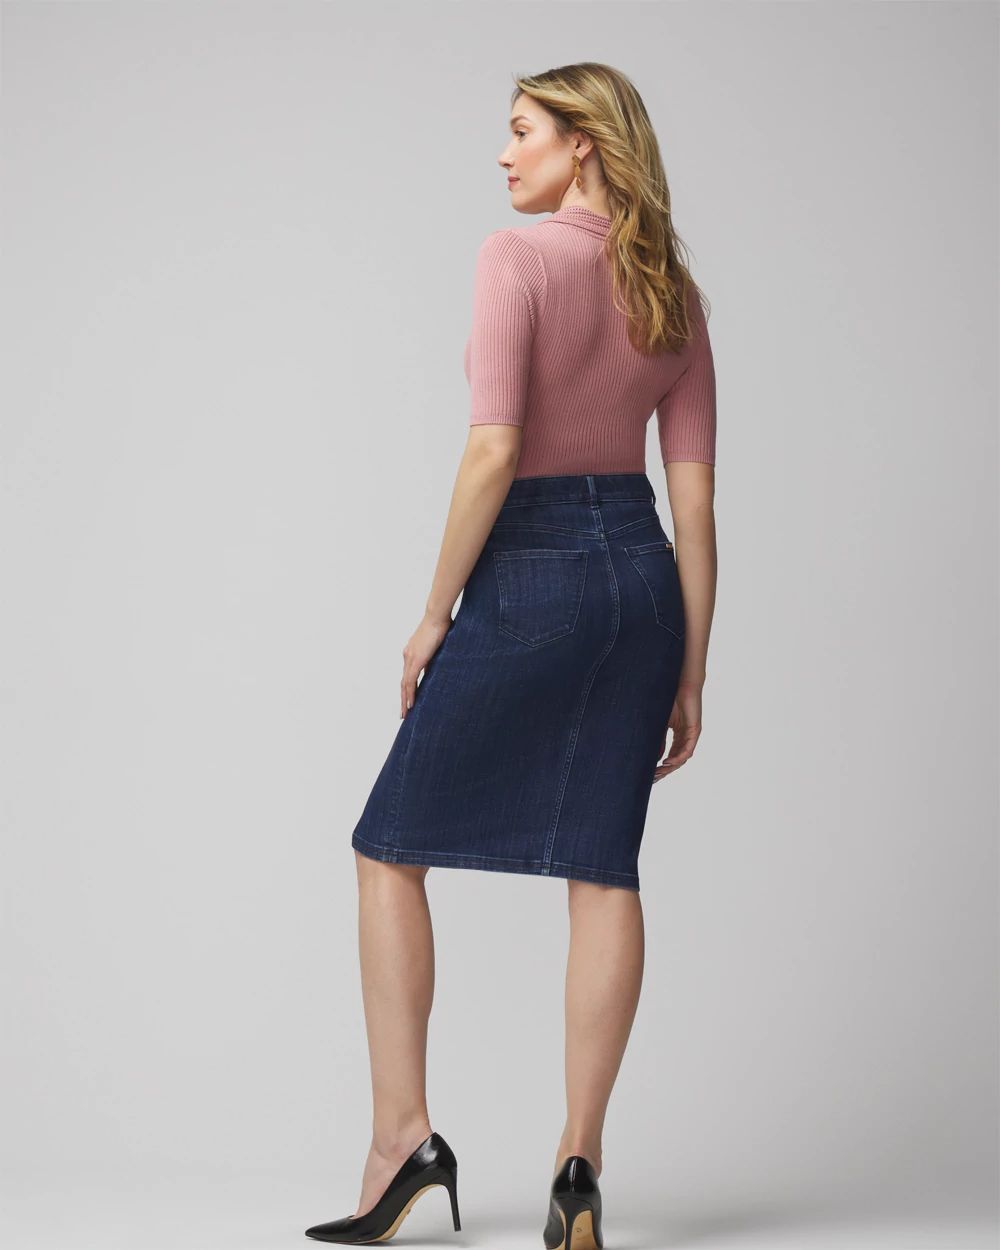 Denim Pencil Skirt click to view larger image.